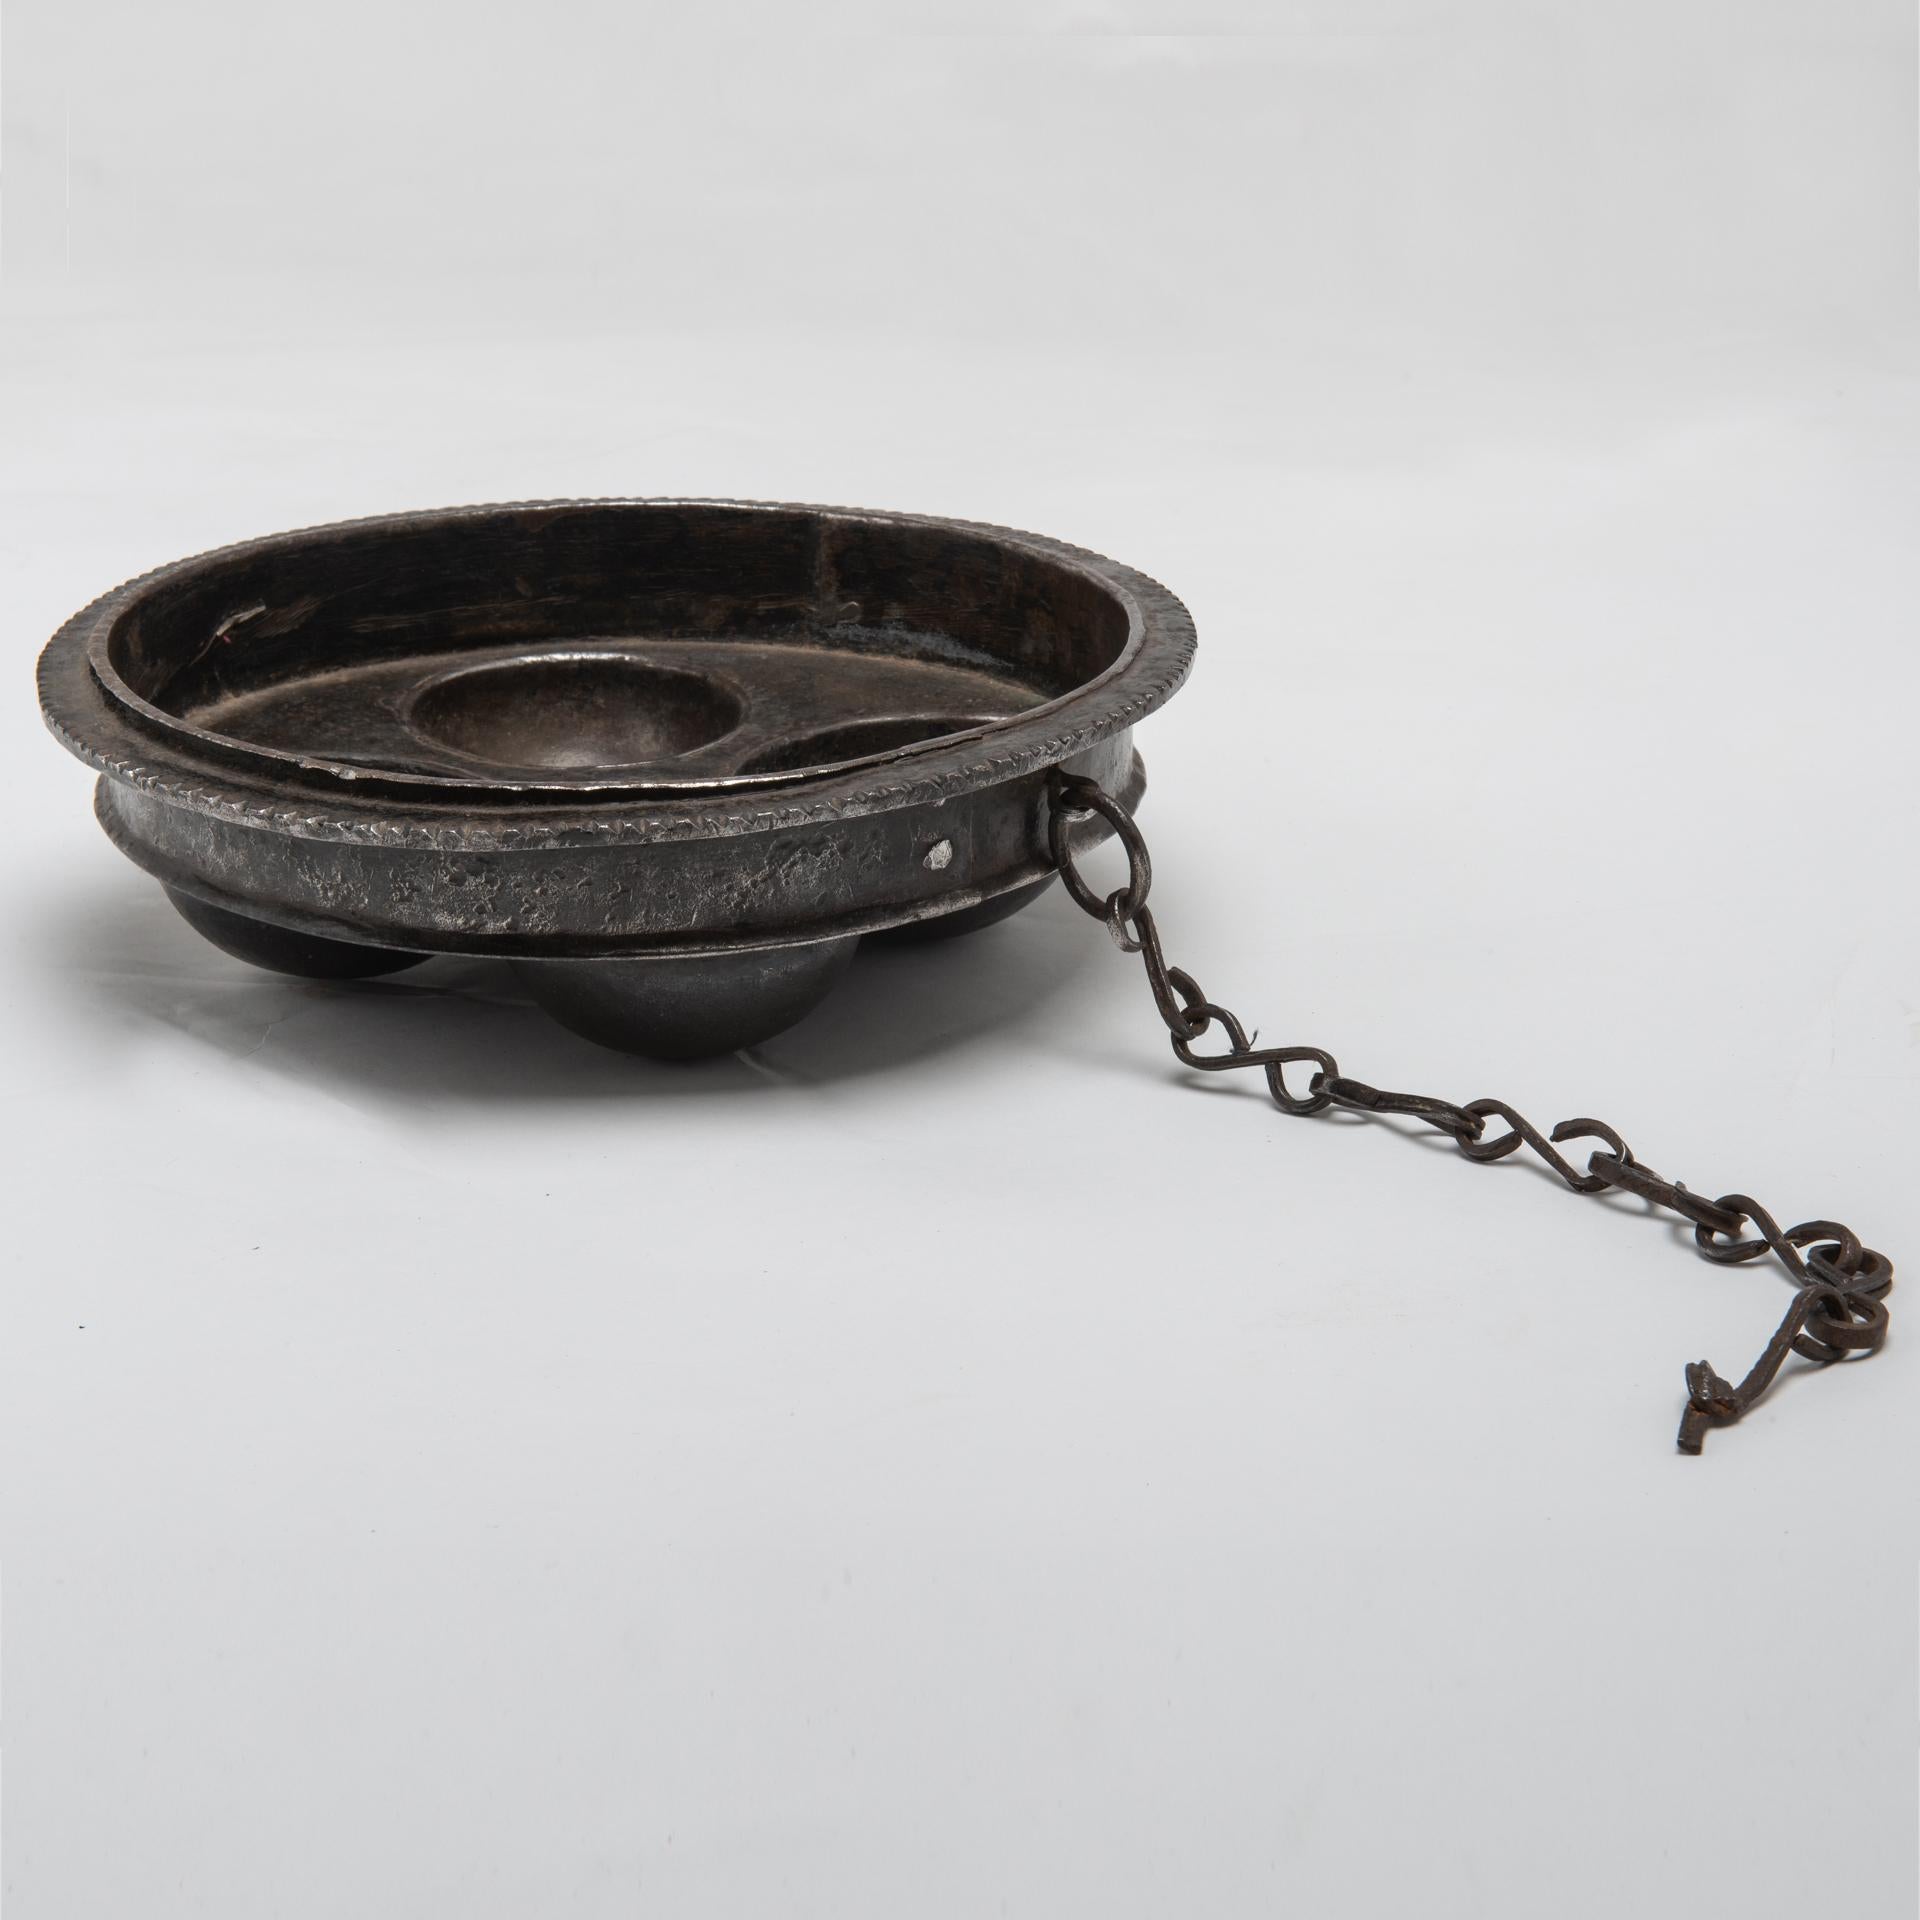 Antique Strange Iron Pot with Chain In Excellent Condition For Sale In Alessandria, Piemonte